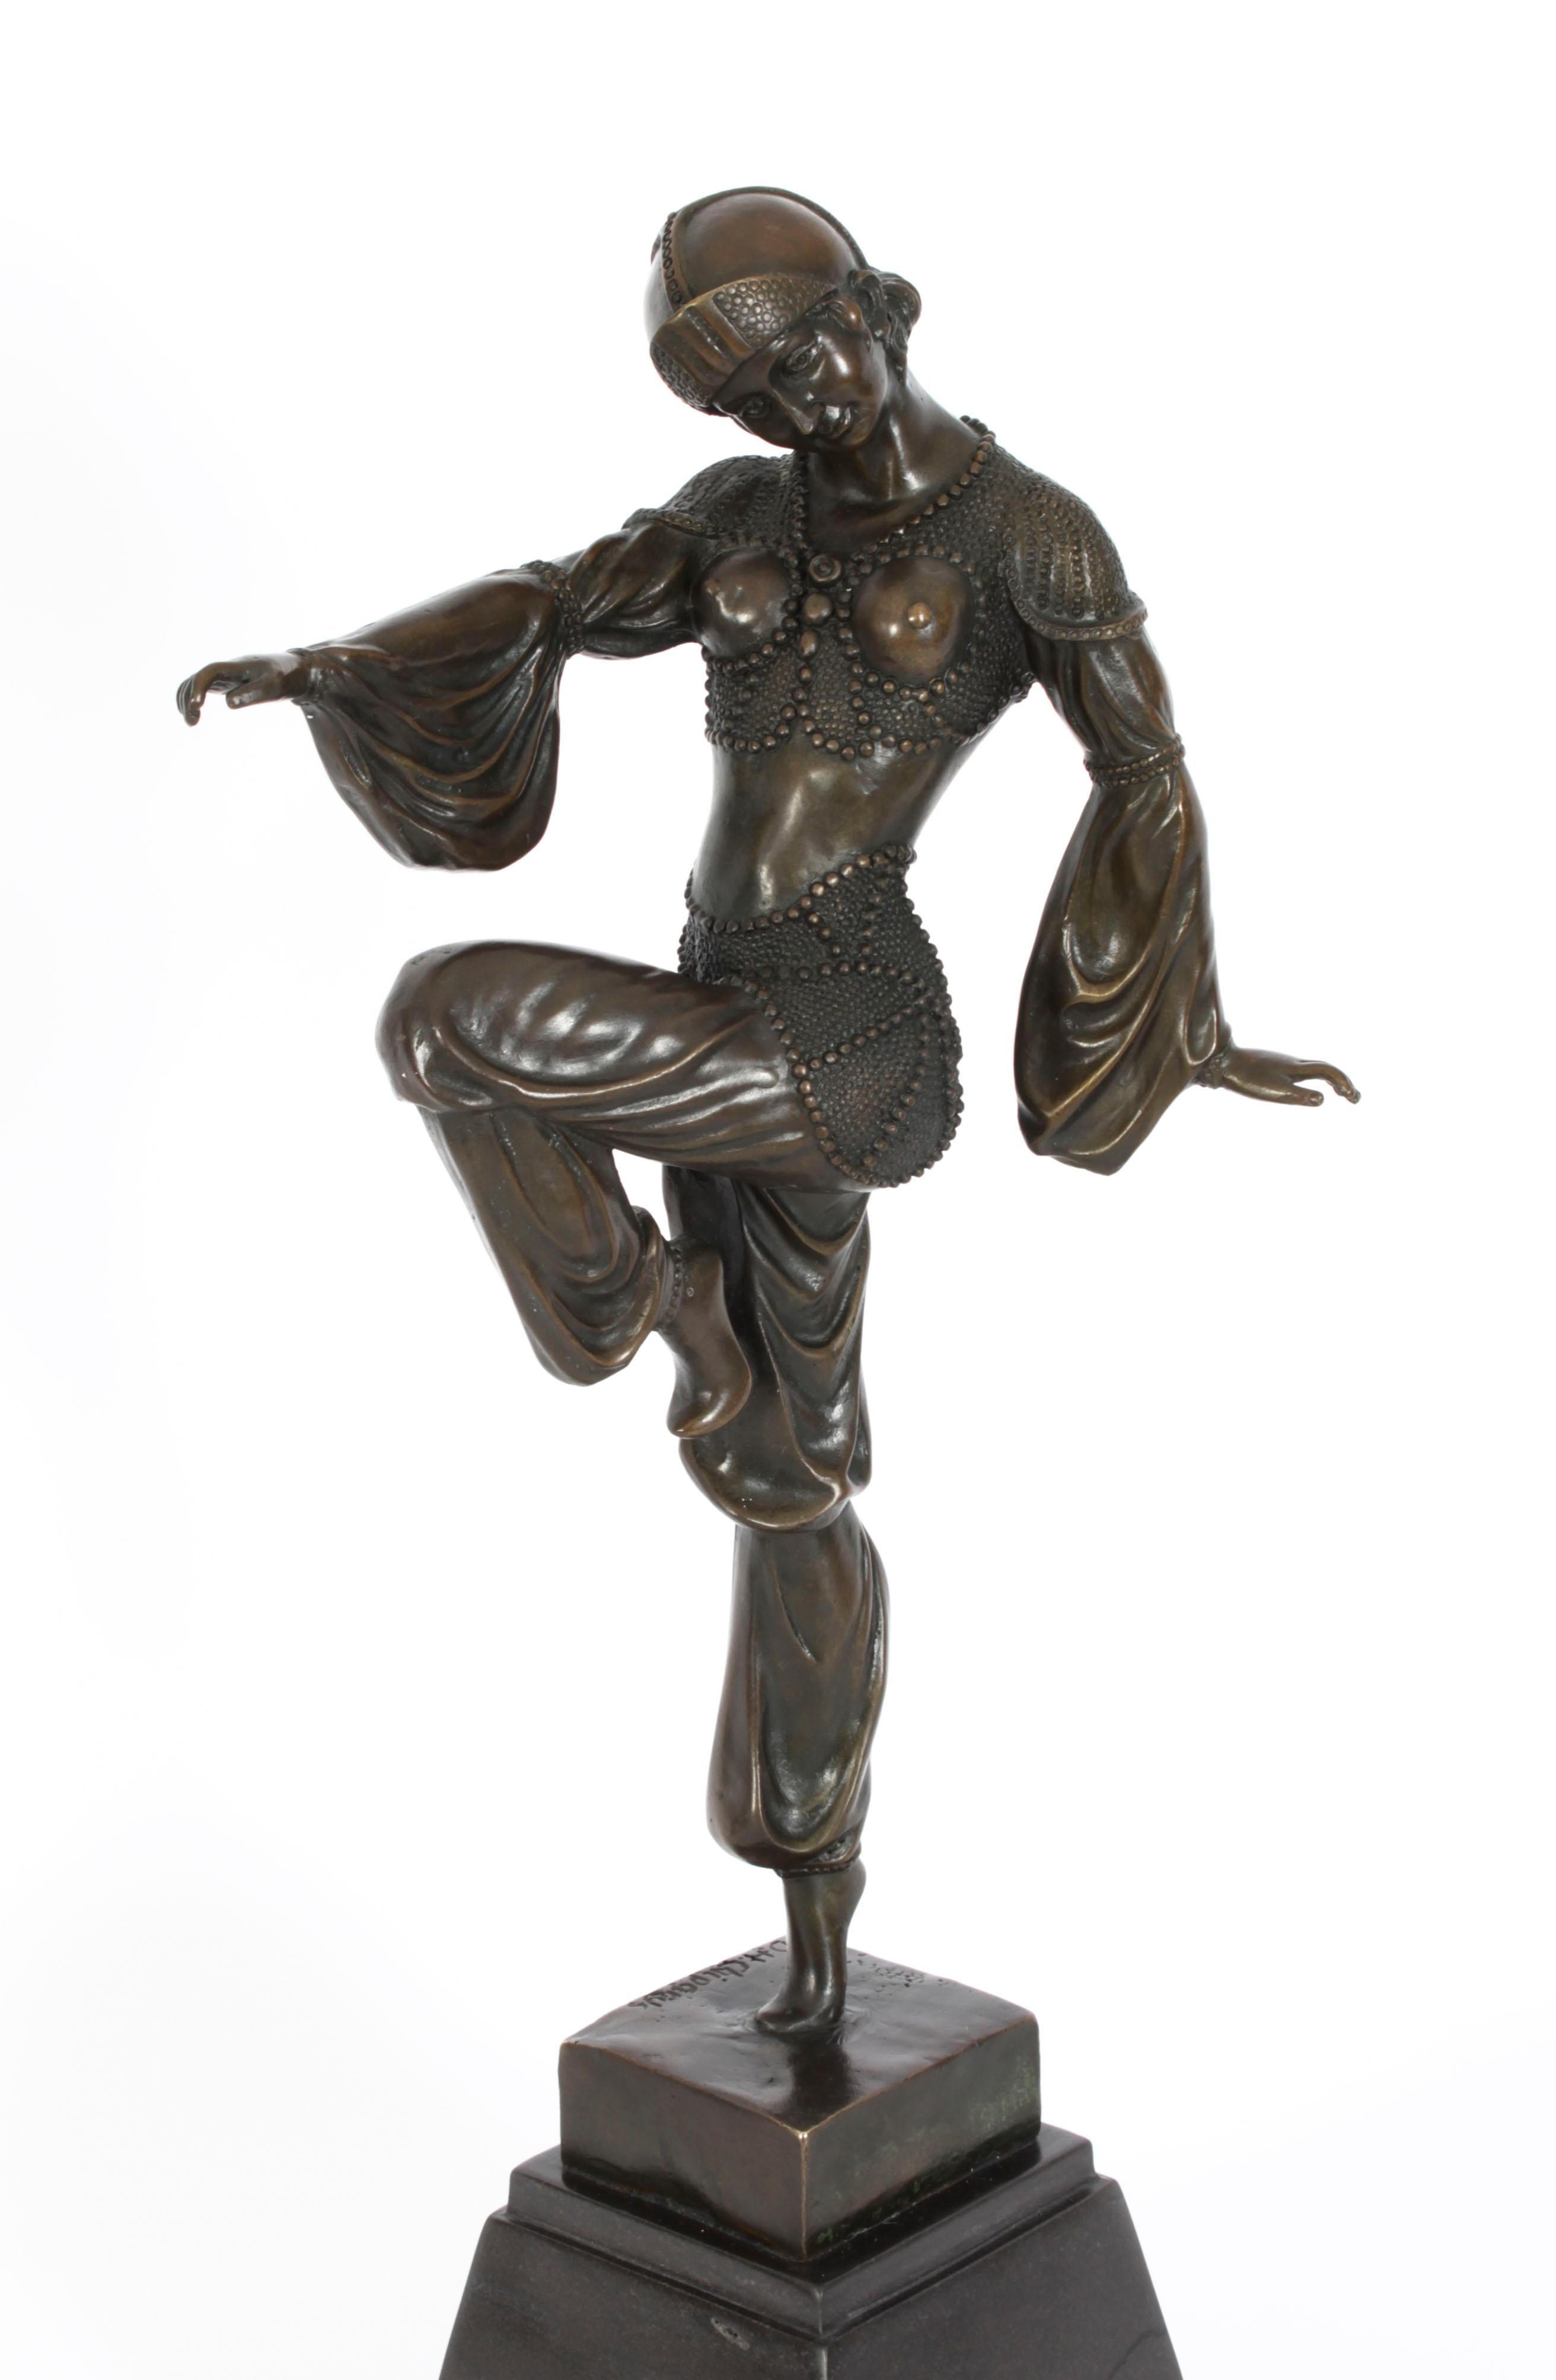 This is an eye-catching Vintage Art Deco Revival bronze dancing girl dating from the mid 20th century.

This beautiful piece is a 20th Century recast of a sculpture created by the famous Romanian sculptor Demetre Chiparus.

Made by the classical